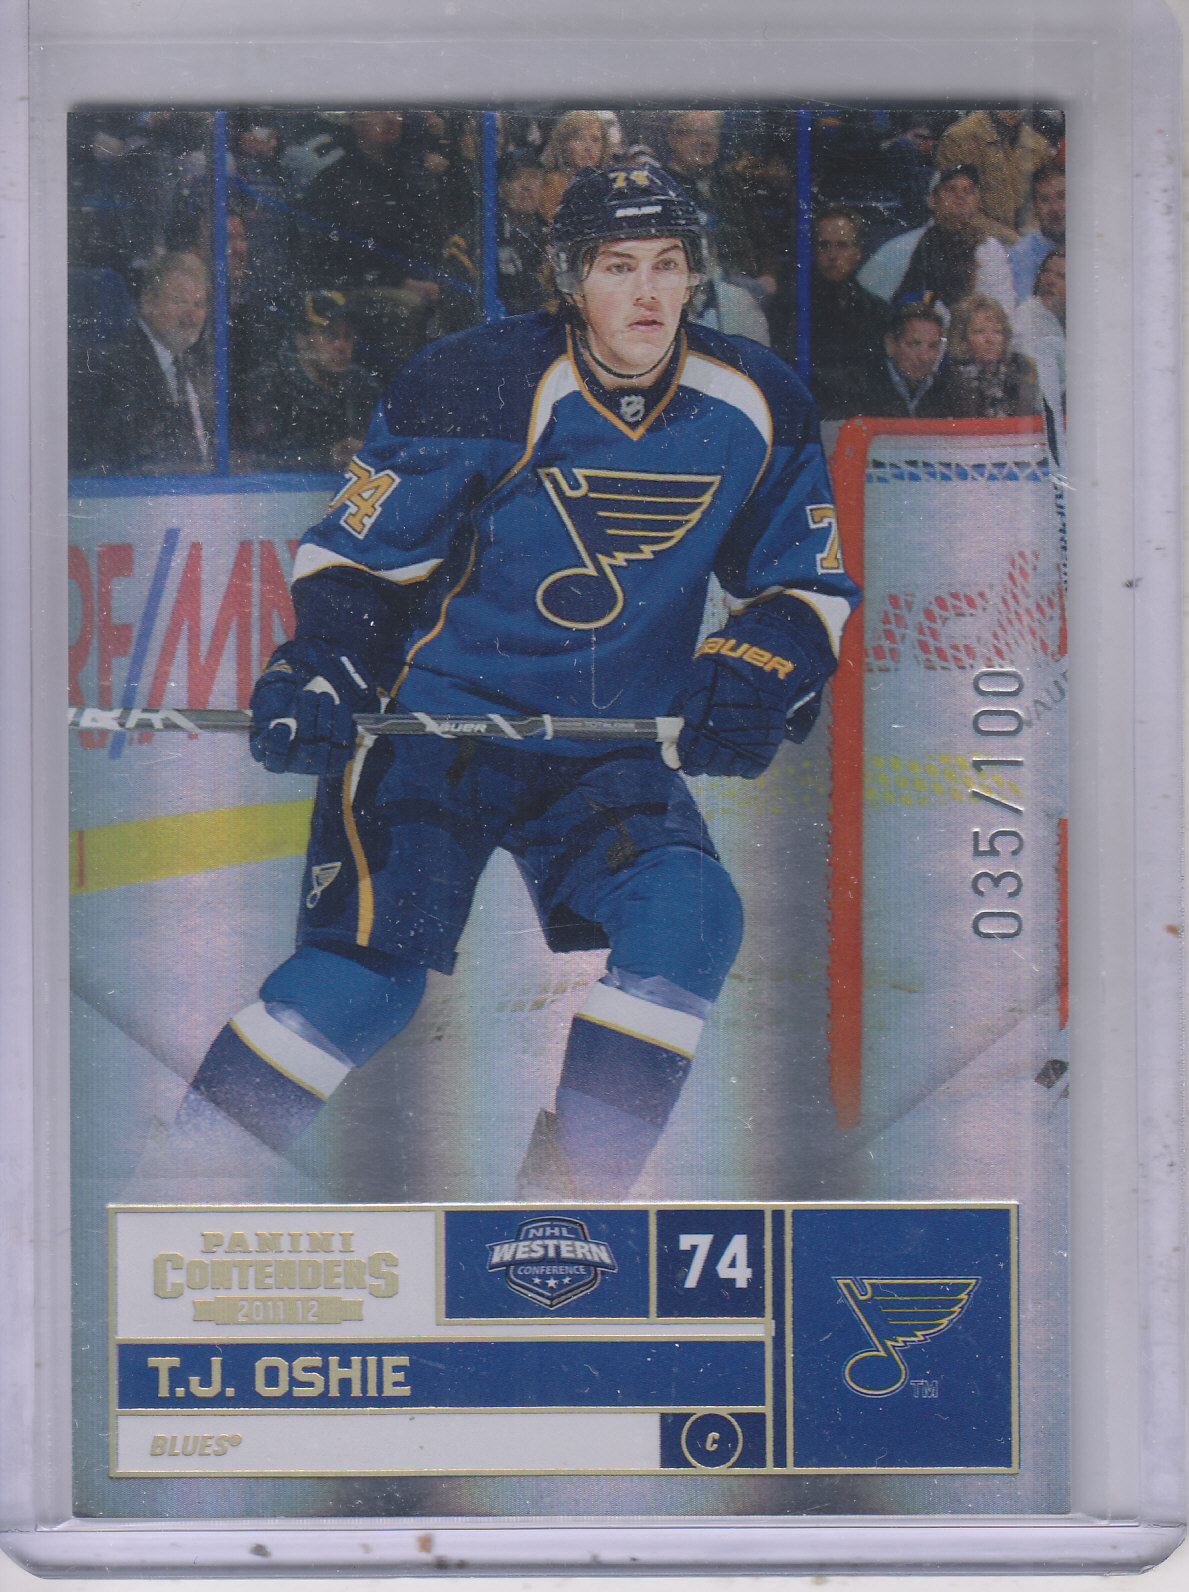 2011-12 Panini Contenders Gold #74 T.J. Oshie